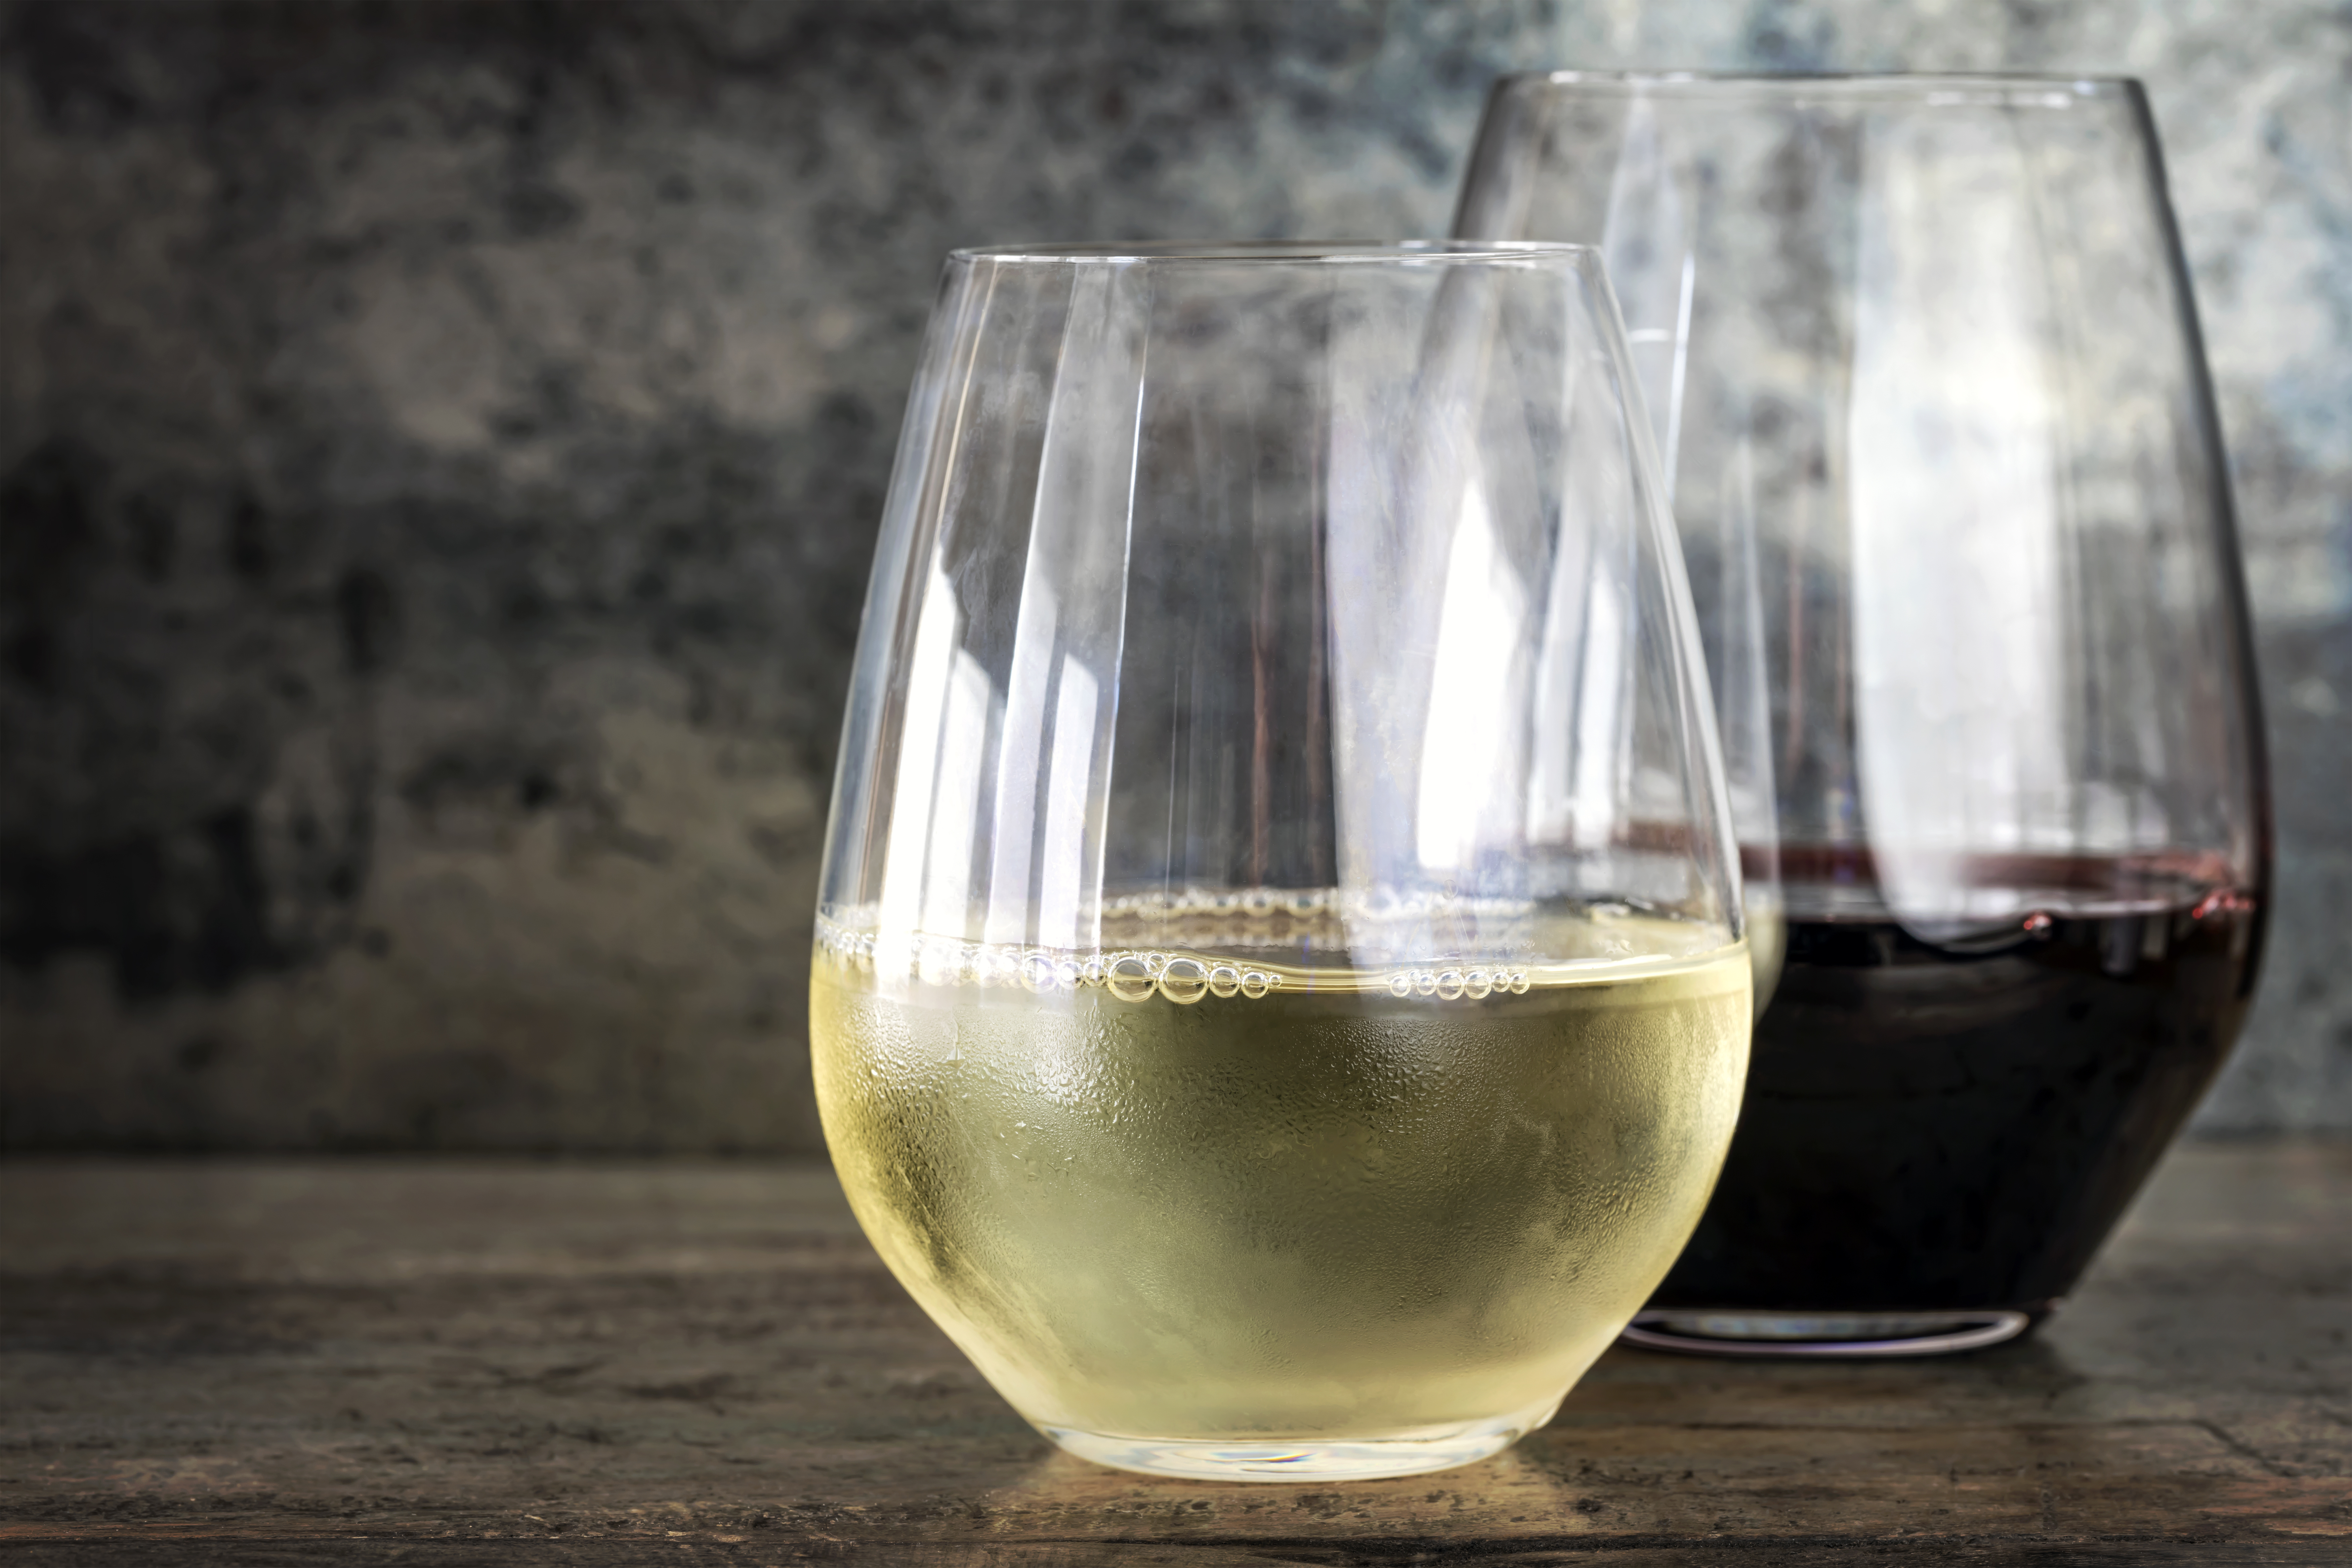 A stemless wine glass filled with white wine in front of a stemless glass filled with red wine